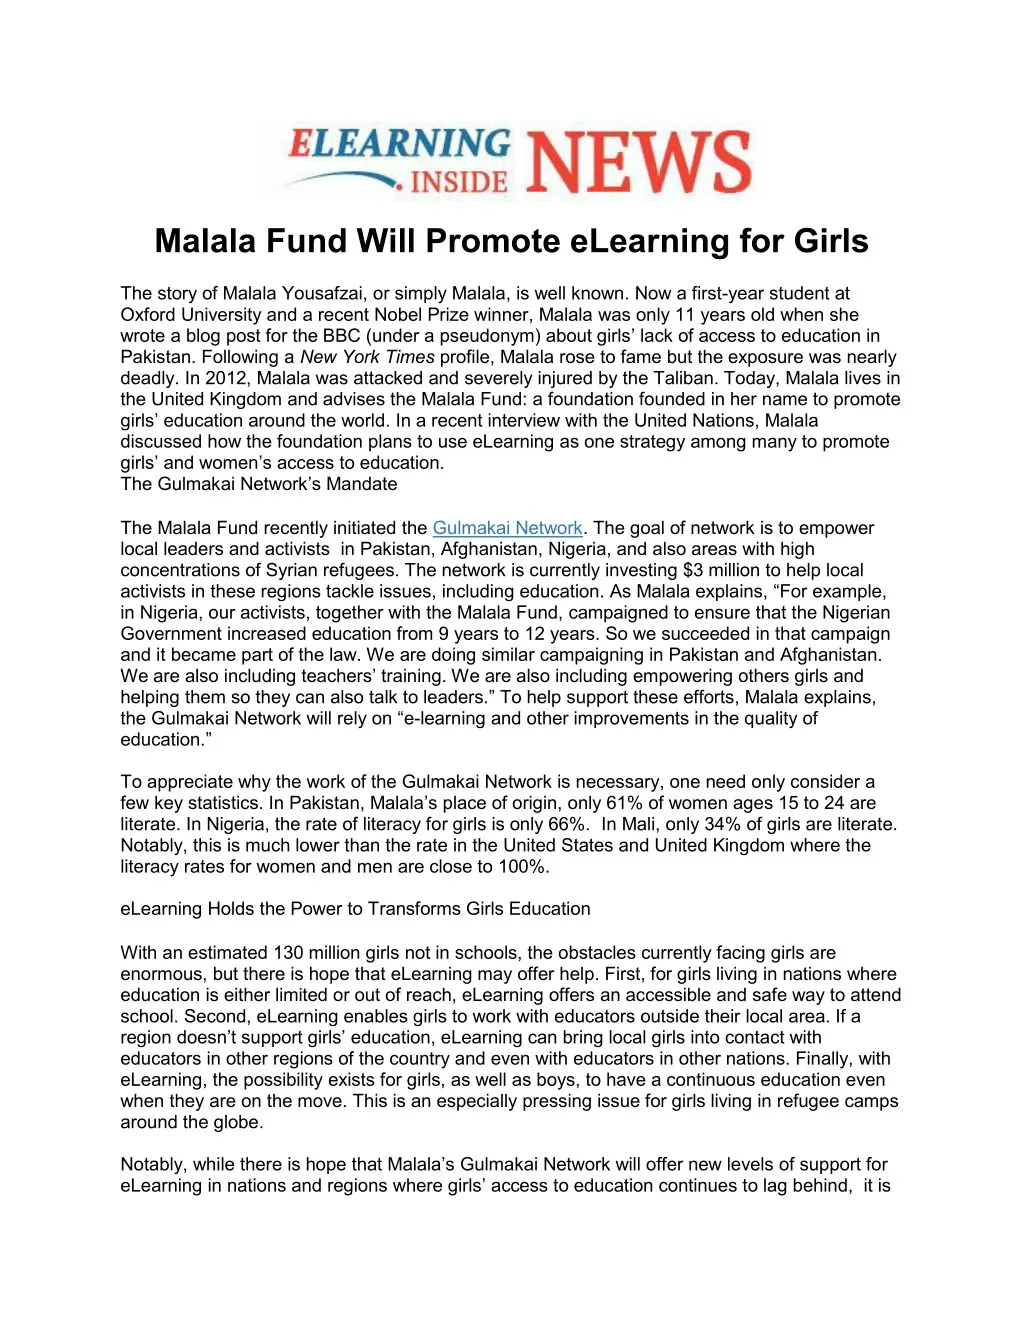 malala fund will promote elearning for girls